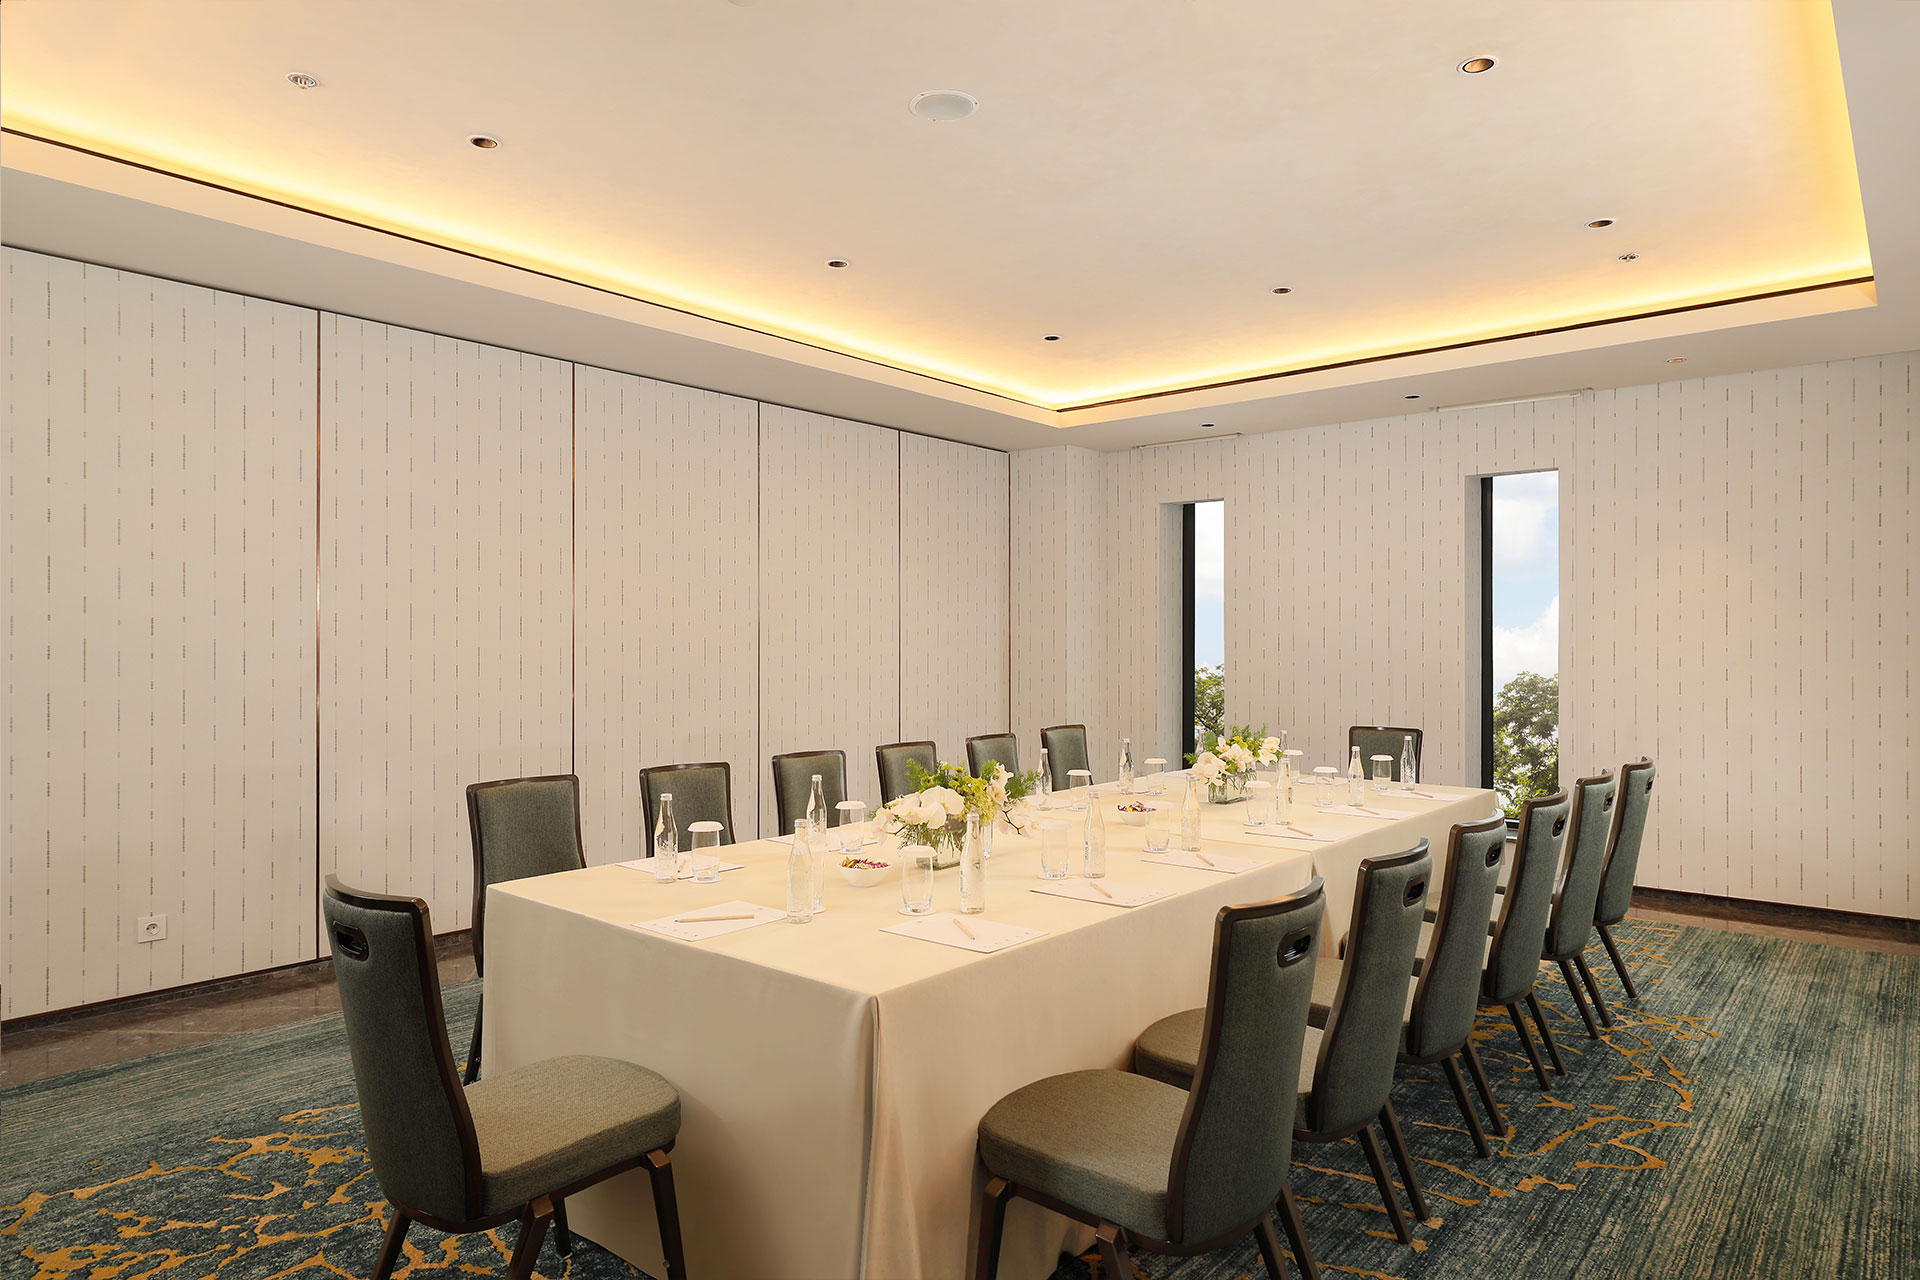 Luxurious indoor venue for meeting and private event with green view and board room set up